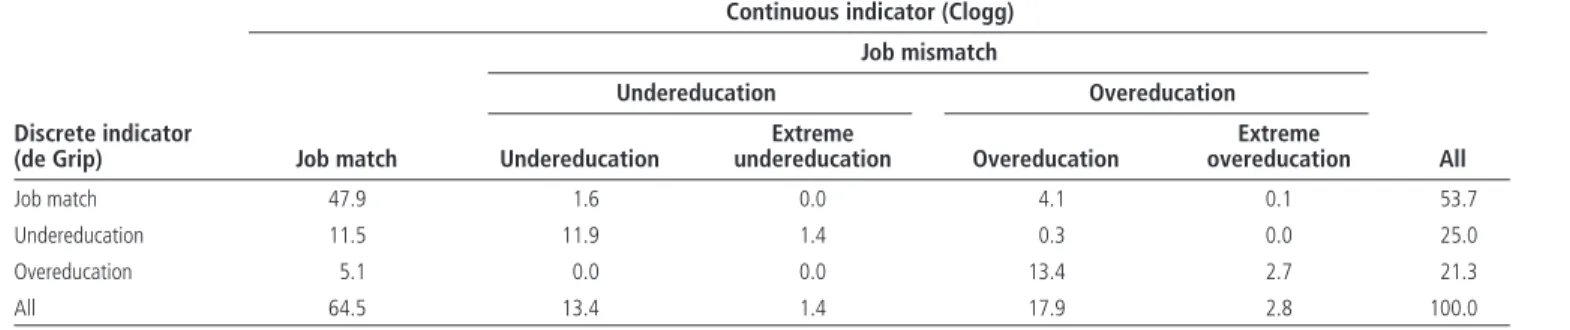 Table 2.1  Clogg and de Grip Measures of Job Mismatch in 10 Cities in Sub-Saharan Africa  (percent)